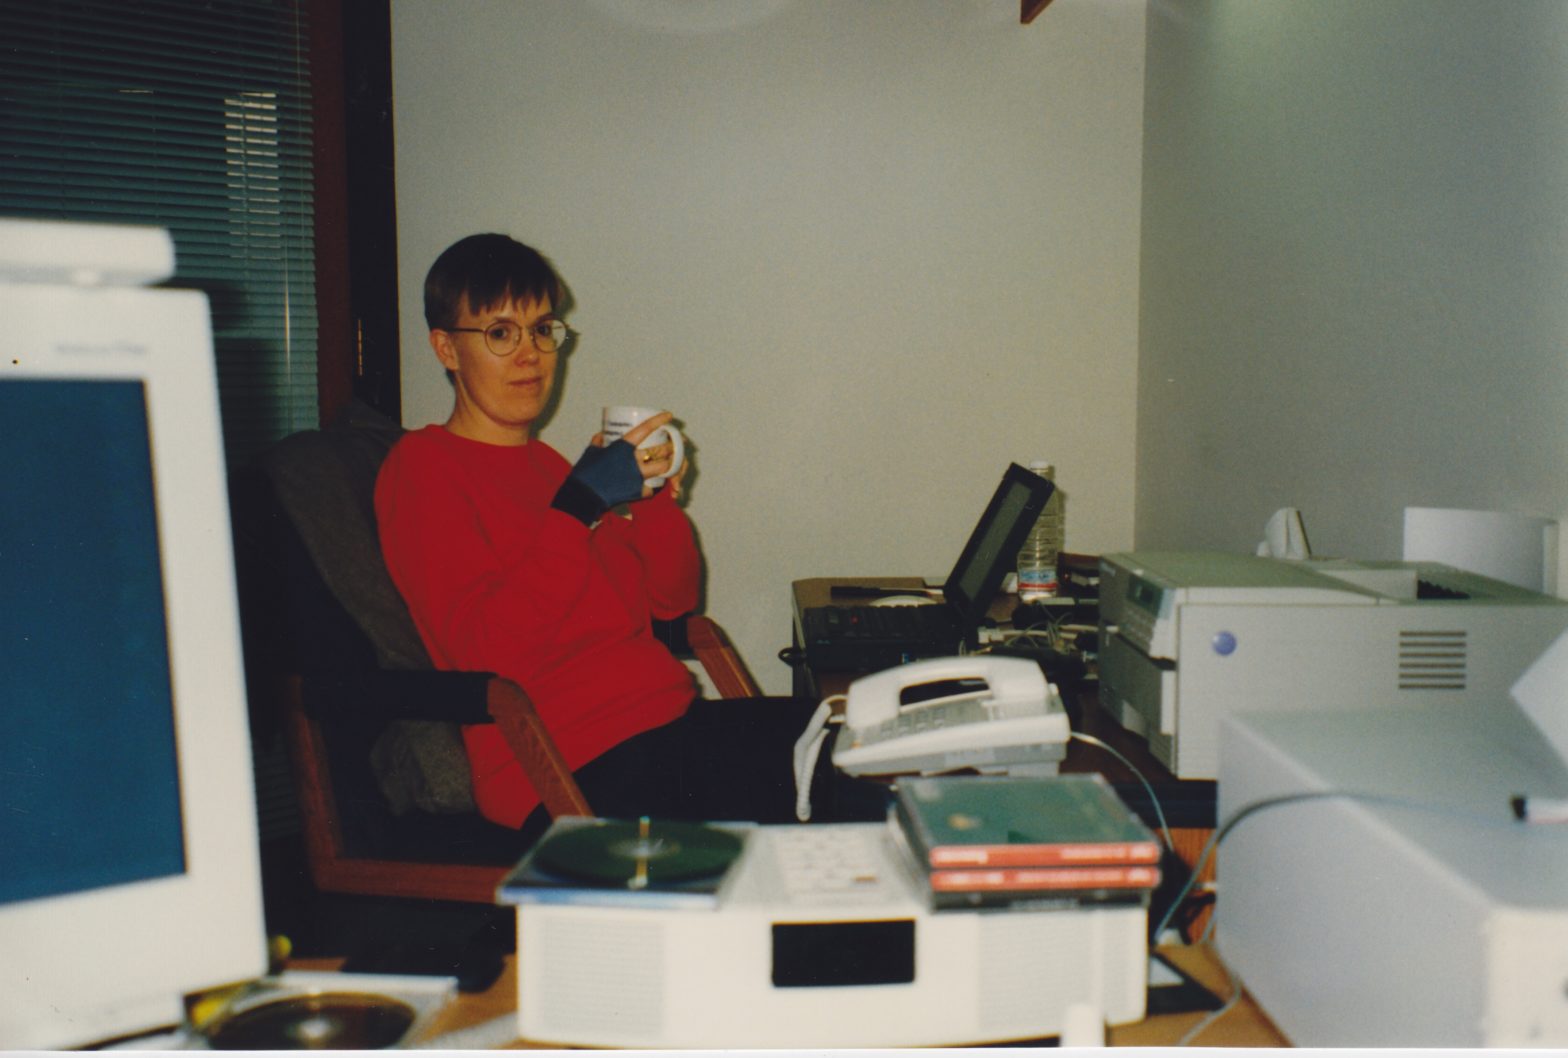 Deirdré at her desk at Incat Systems' Campbell CA office - I'm in the background wearing a red sweatshirt, surrounded by beige-colored electronics (CRT monitor, printer, office phone...)